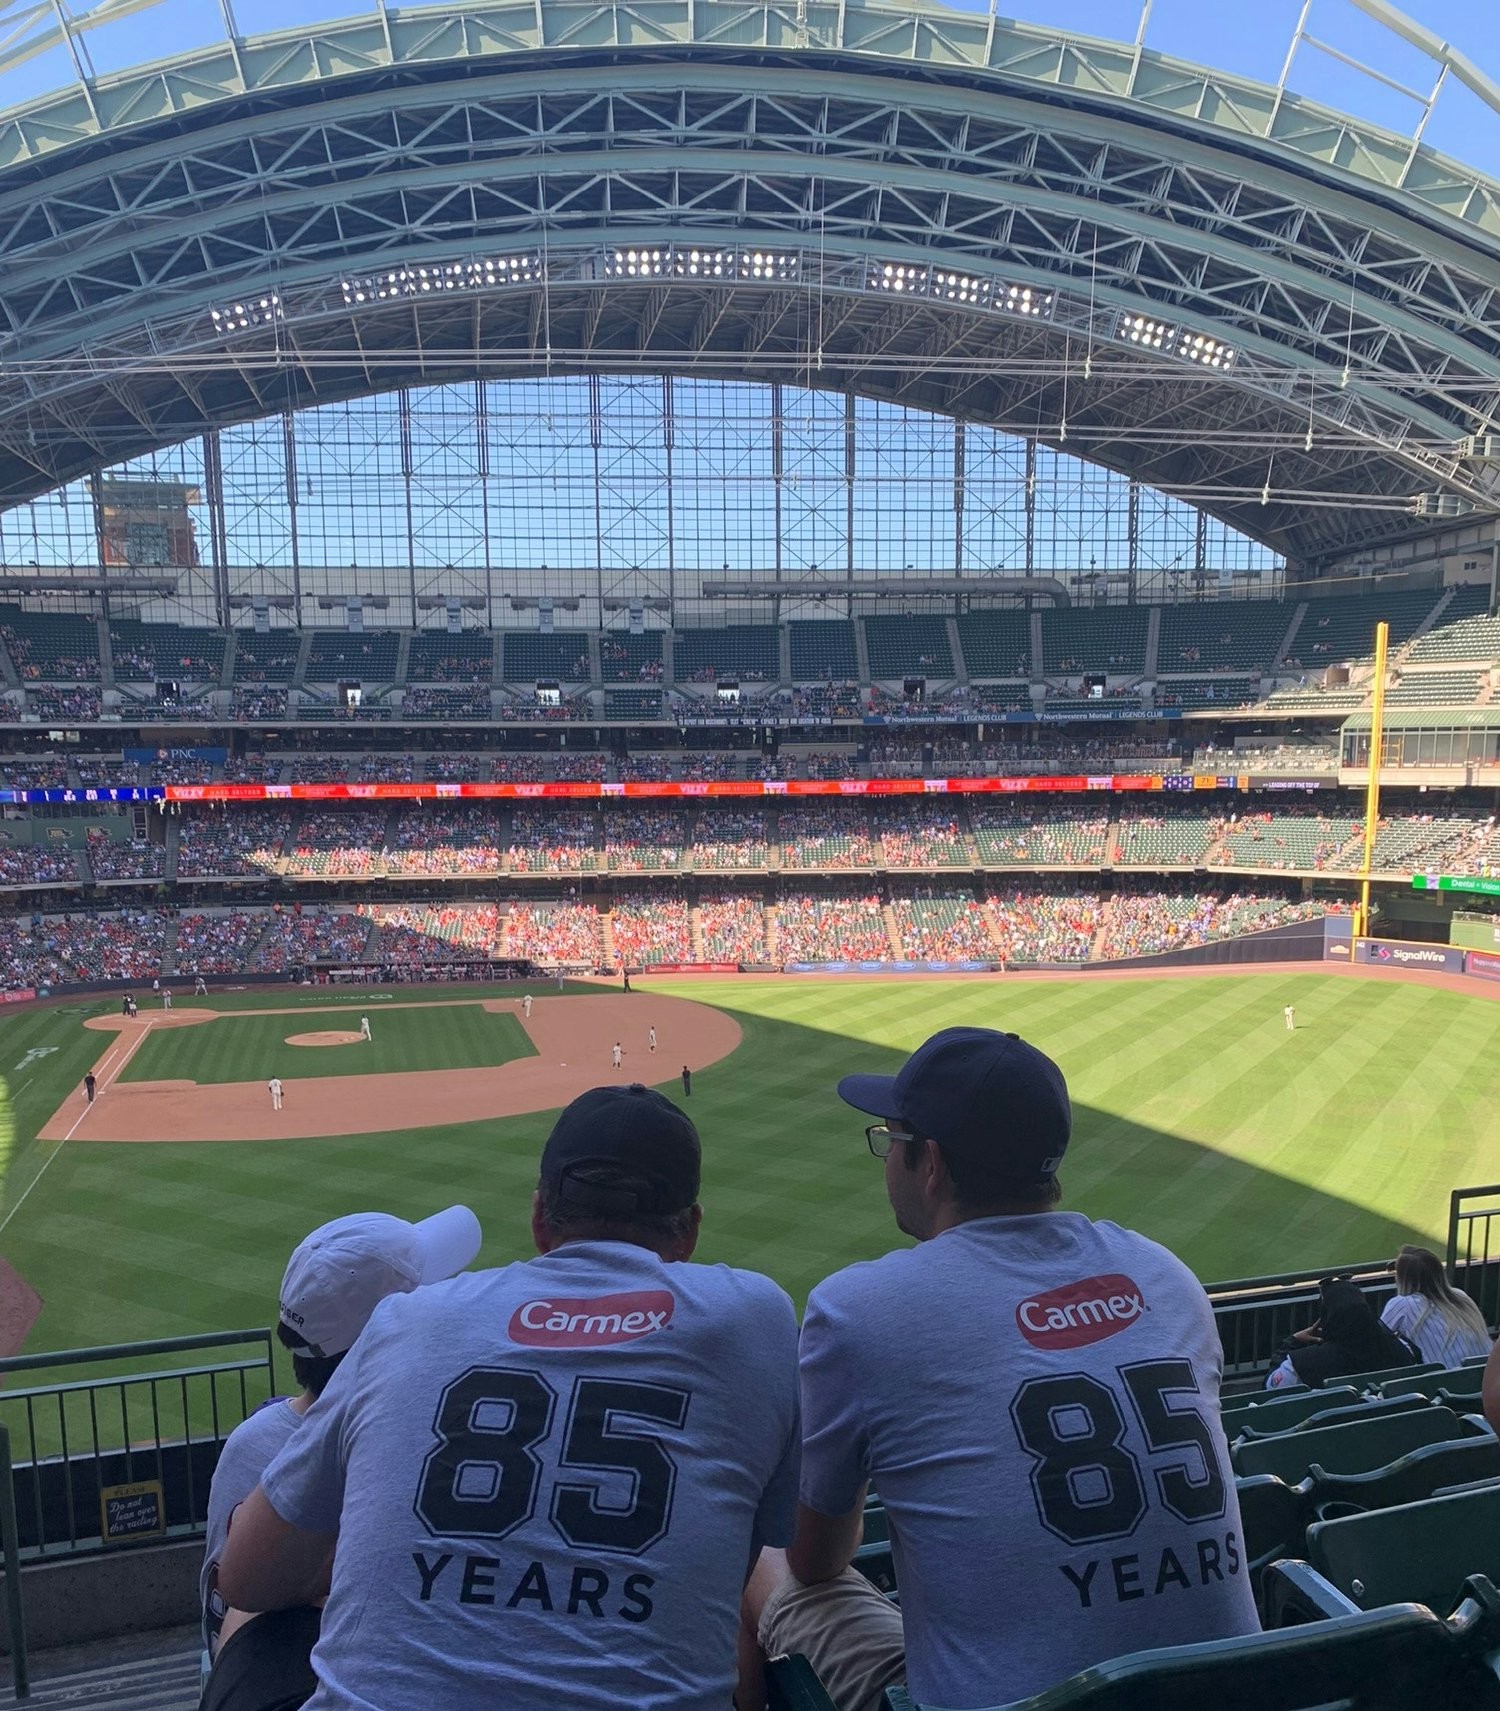 Team members enjoying our annual summer event at a Milwaukee Brewers baseball game.